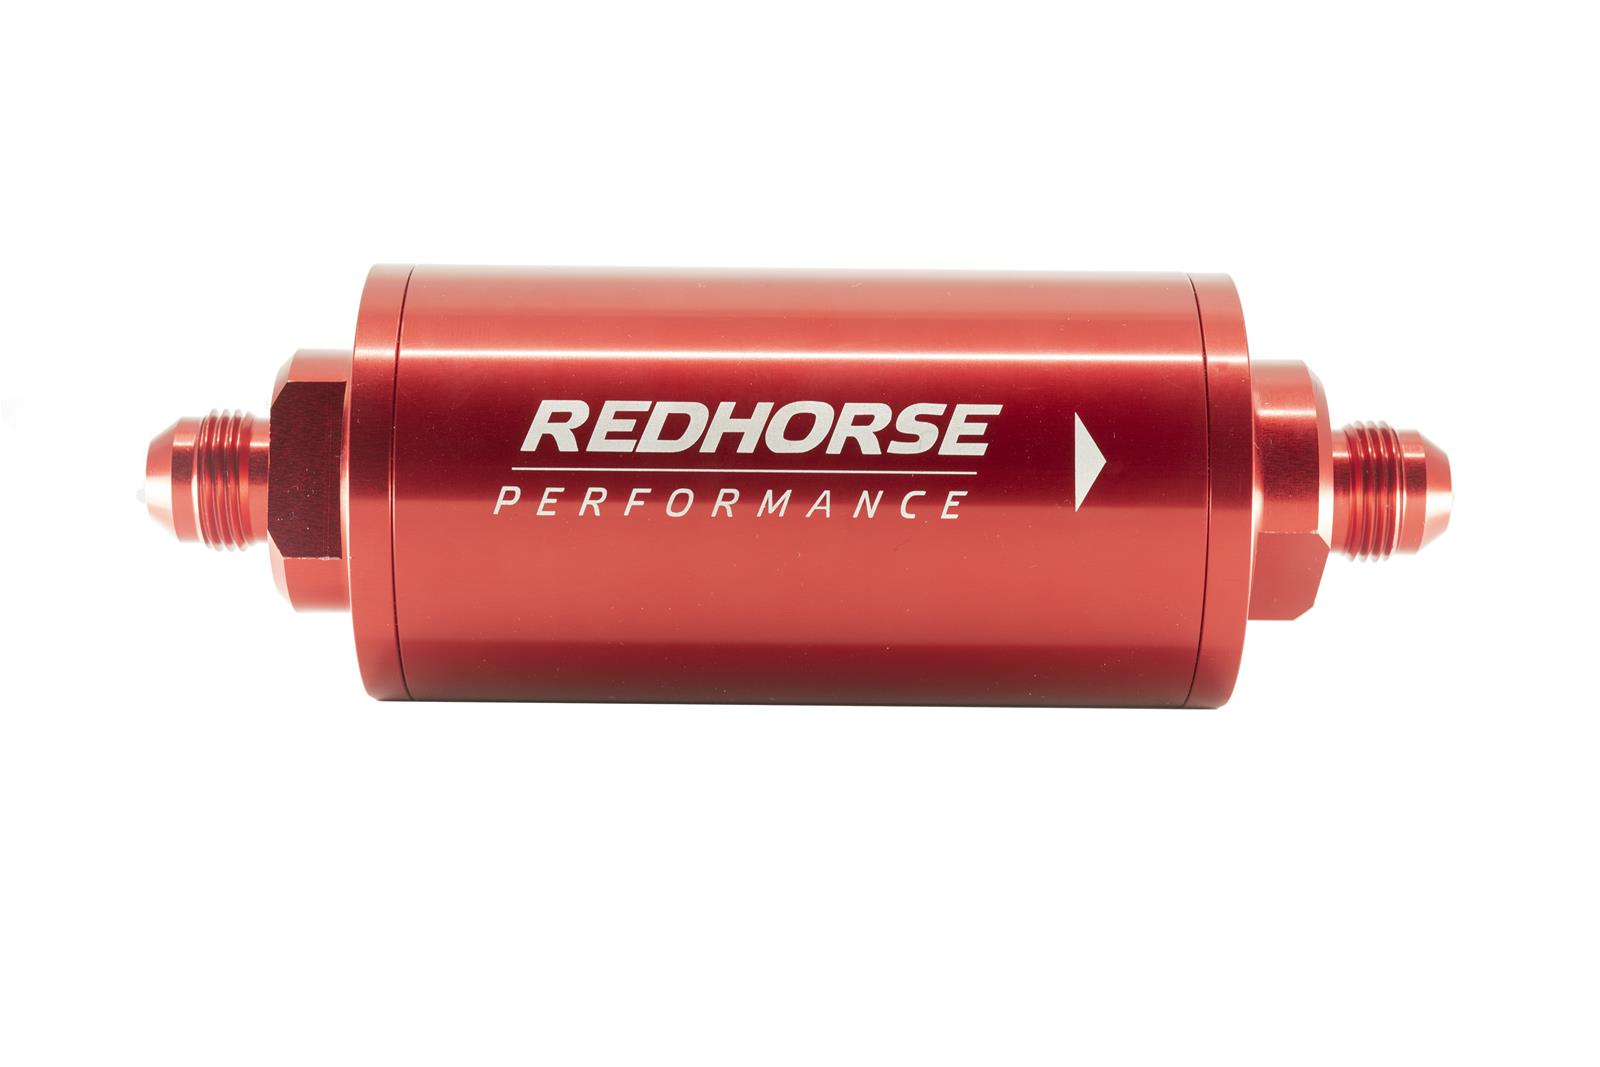 Redhorse Performance 4651-06-3 6in Cylindrical In-Line Race Fuel Filter - 06 AN - Red